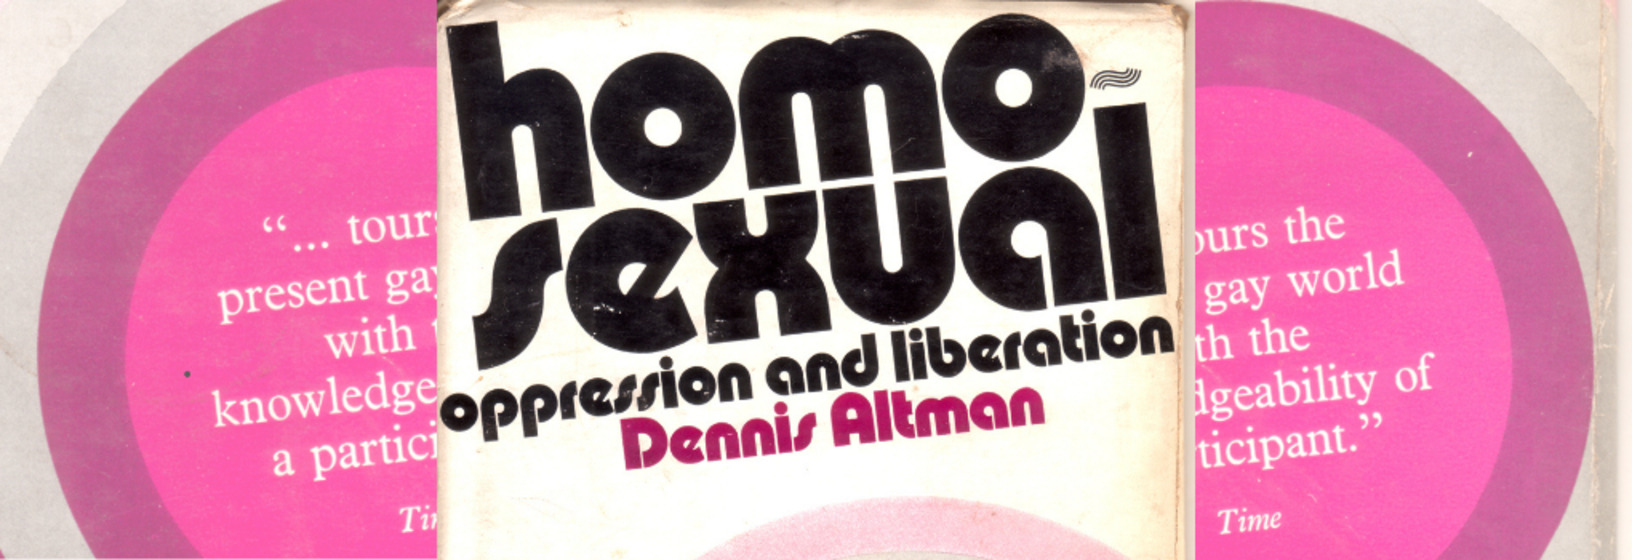 Detail images of 'Homosexual: Oppression and Liberation' by Dennis Altman book cover collaged to create a banner image